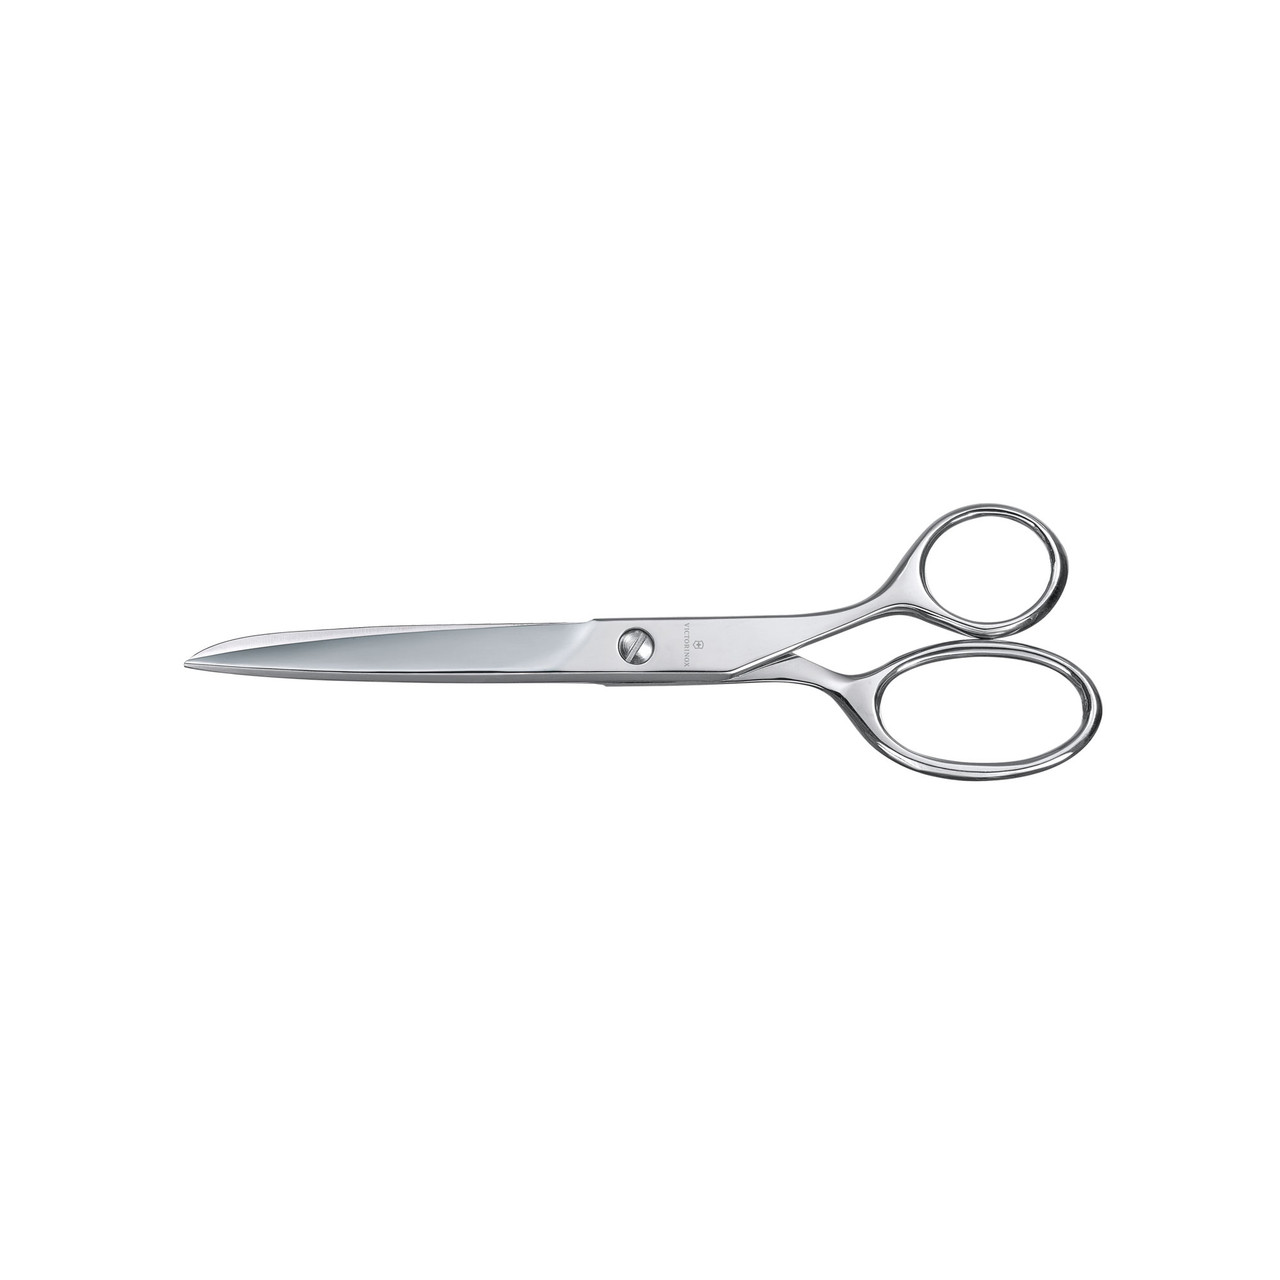 https://www.hospitalitydirectory.com.au/images/product_images/Victorinox/Showcases/2024/Accessories/HOUSEHOLD%20SCISSORS%20SWEDEN18CM.jpg